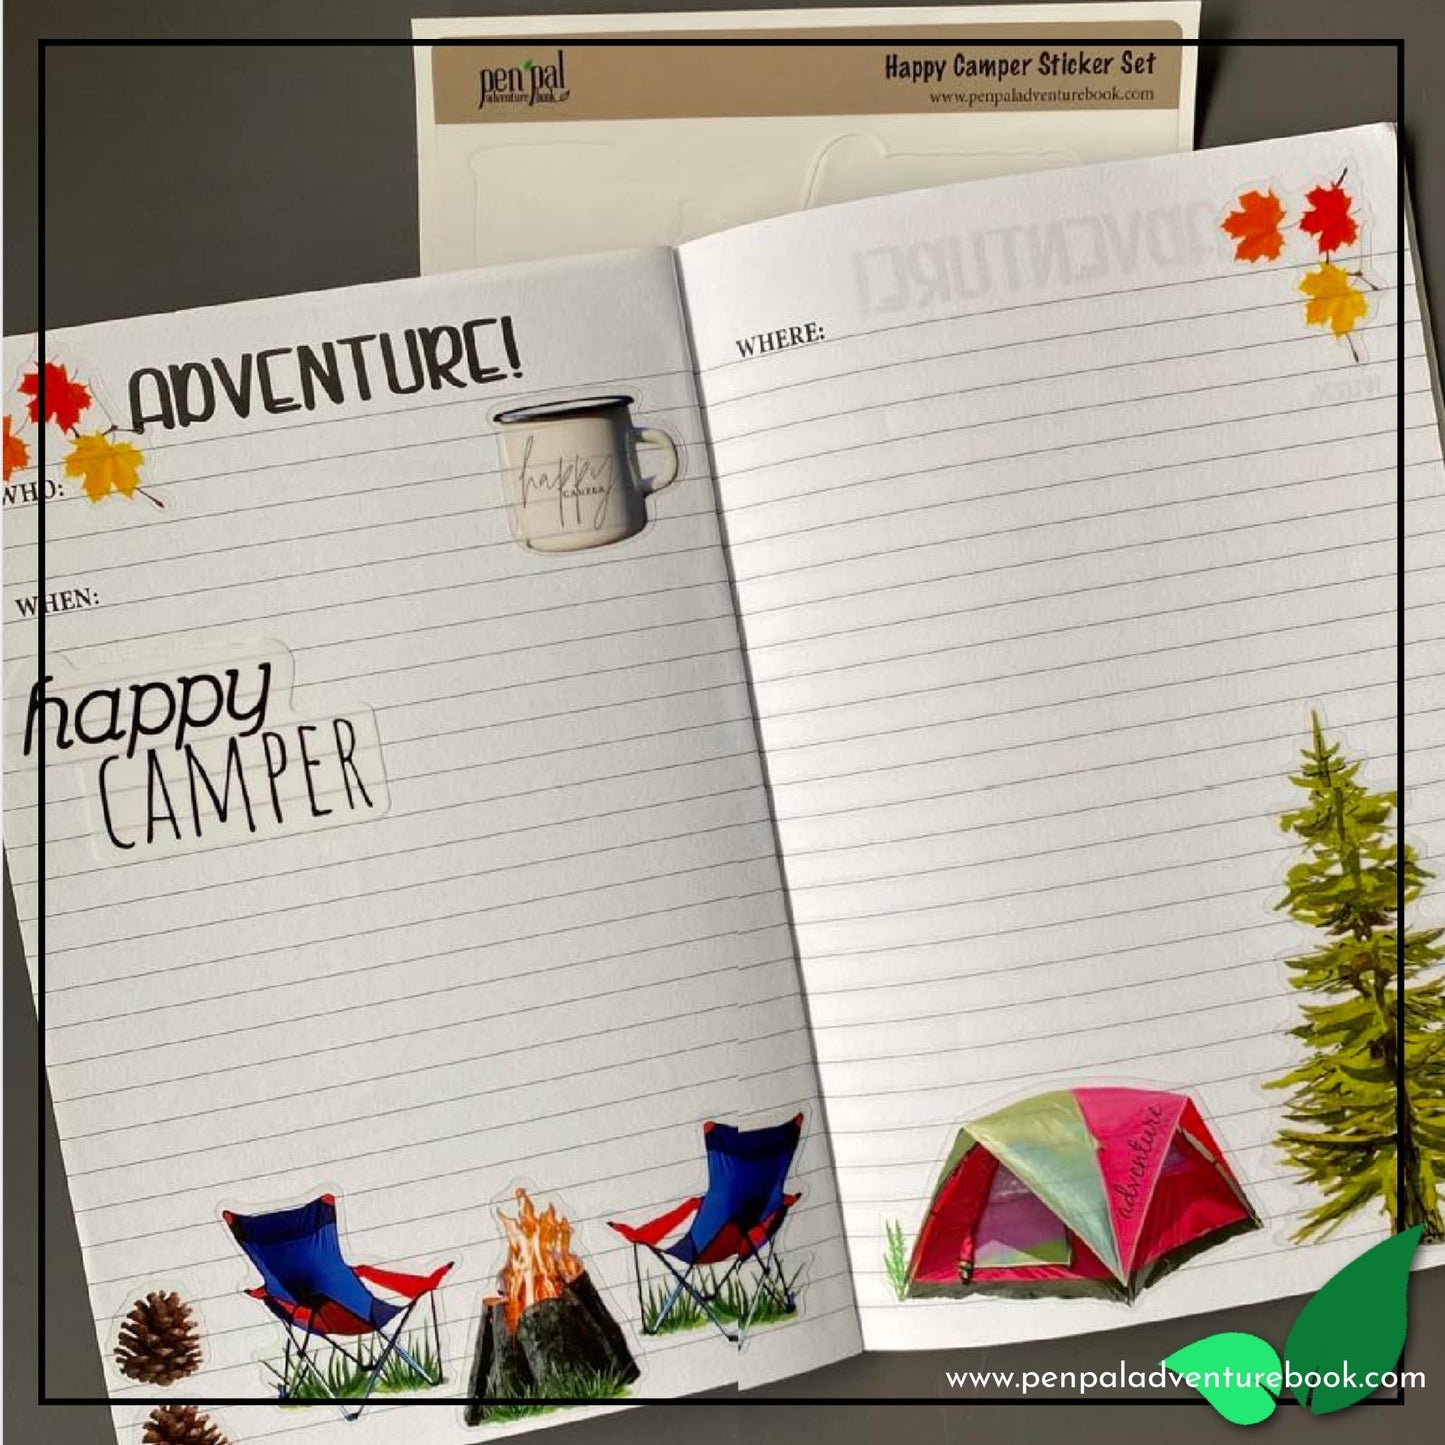 Little Dose of Happy Gift Set with Pen Pal Adventure Journal & Sticker Set